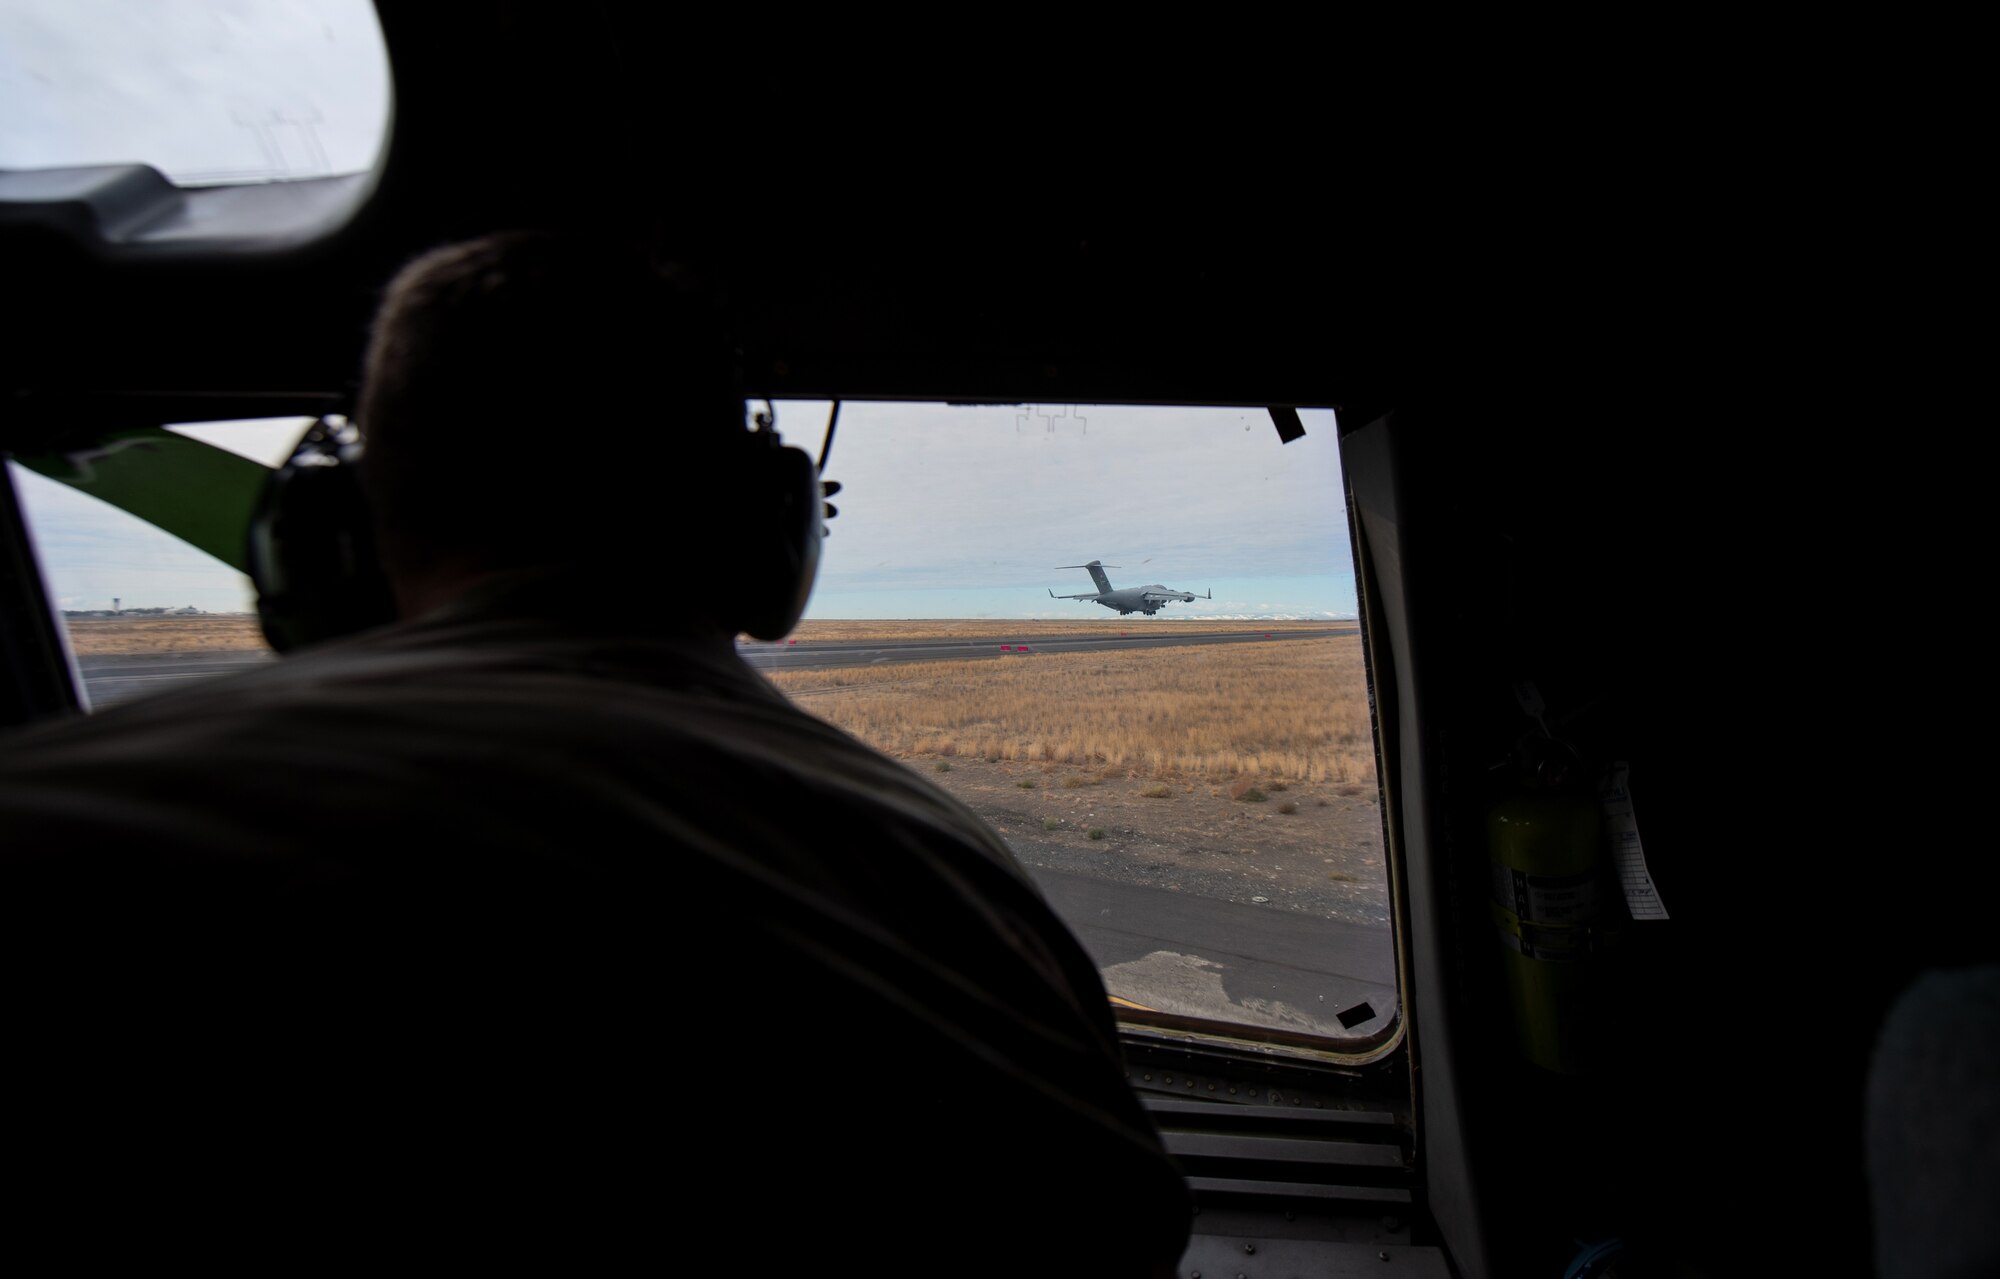 U.S. Army Col. Skye Duncan, Joint Base Lewis-McChord (JBLM) commander, watches a C-17 Globemaster III take off through the window of another C-17 at Moses Lake Municipal Airport, Wash., Oct. 1, 2019. The purpose of the flight was to provide training opportunities for Air Force pilots and Army Soldiers during a mobility movement exercise. (U.S. Air Force photo by Senior Airman Tryphena Mayhugh)